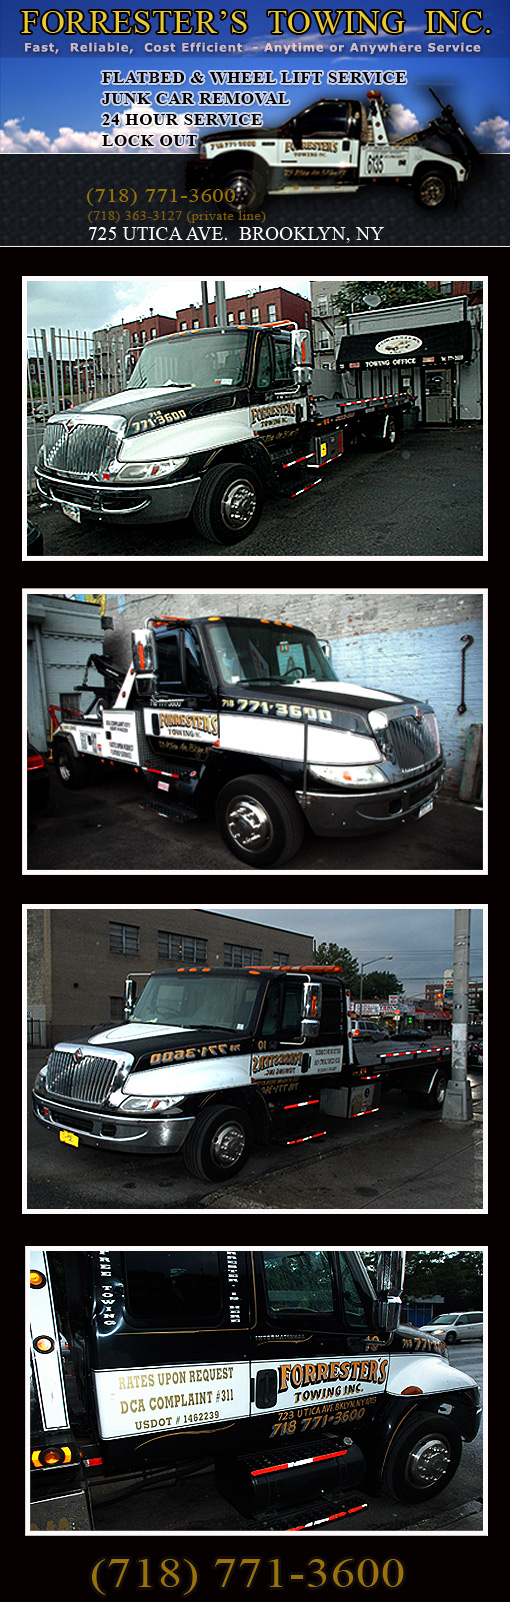 Forrester Towing Utic Ave, Brooklyn NY